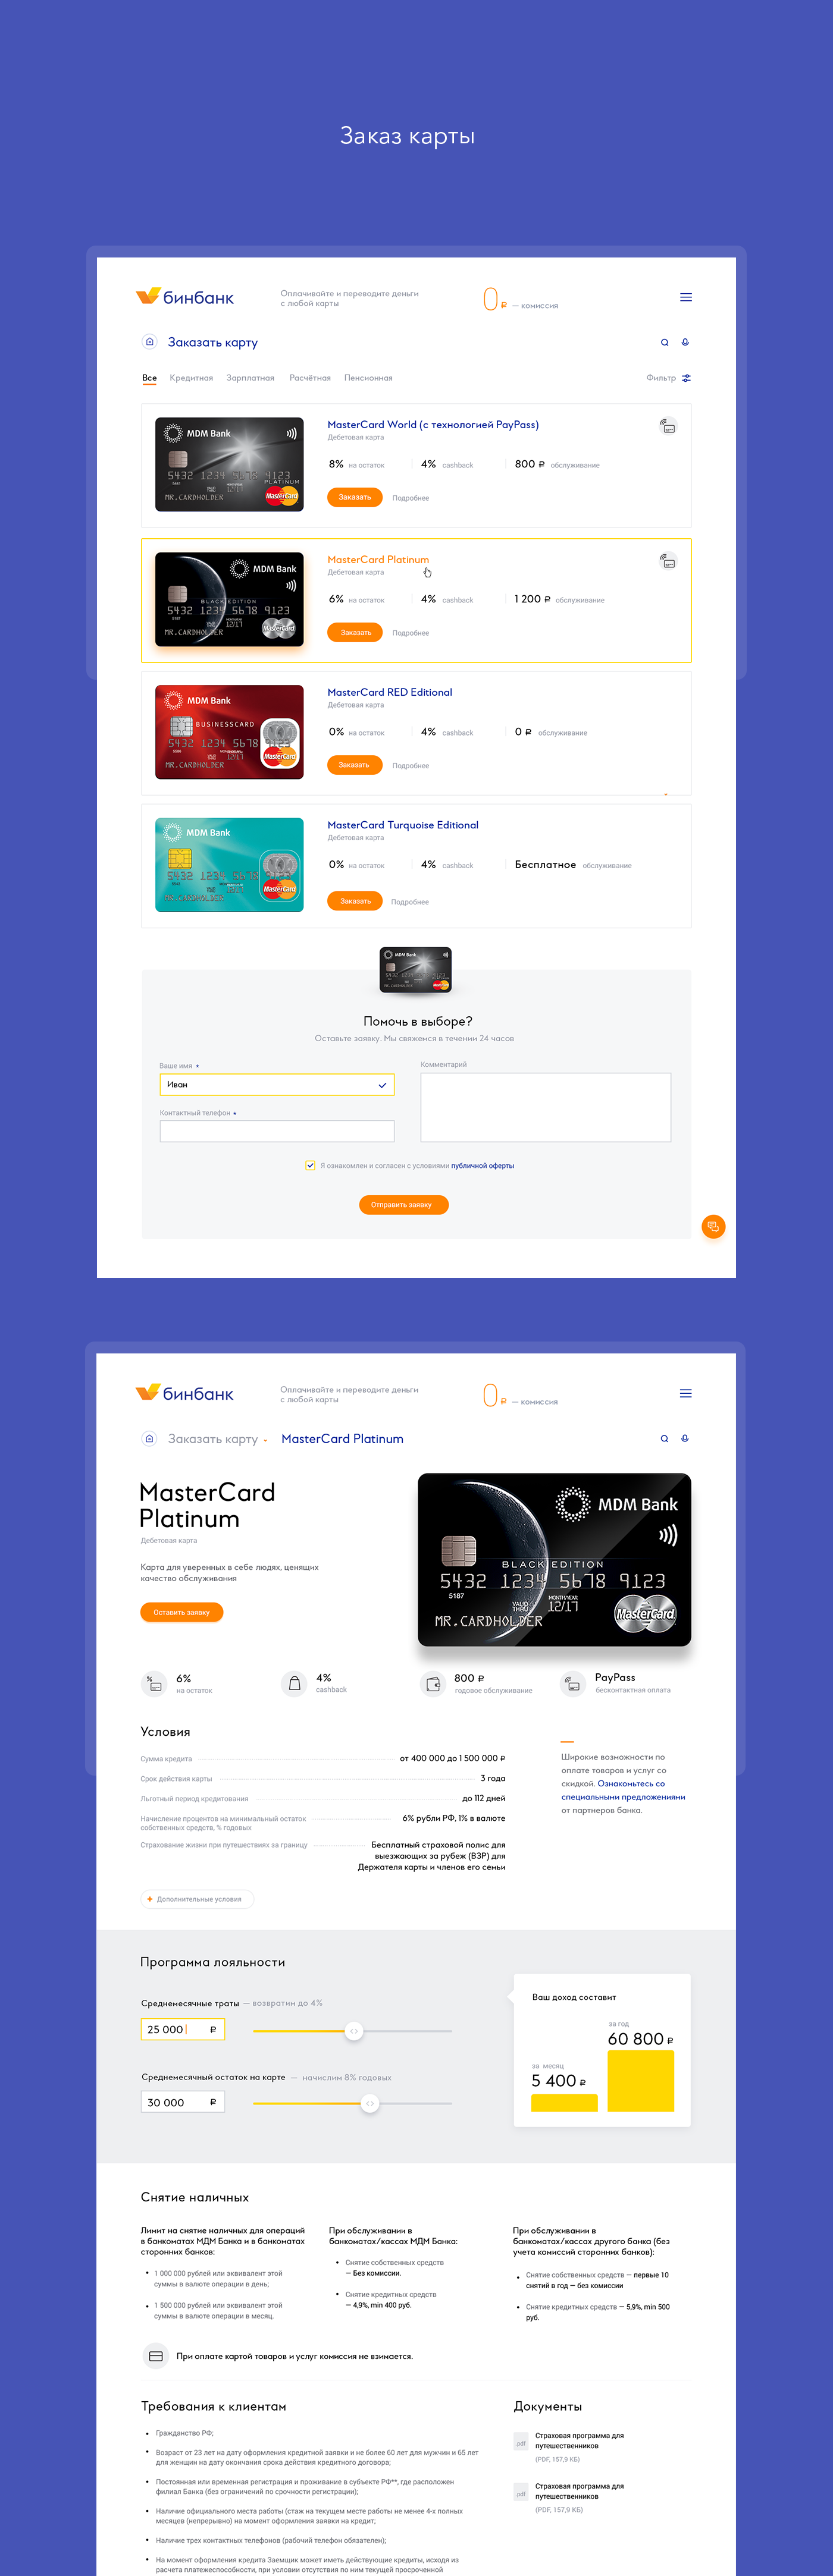 abanking Bank banking card dashboard Marketplace money payments